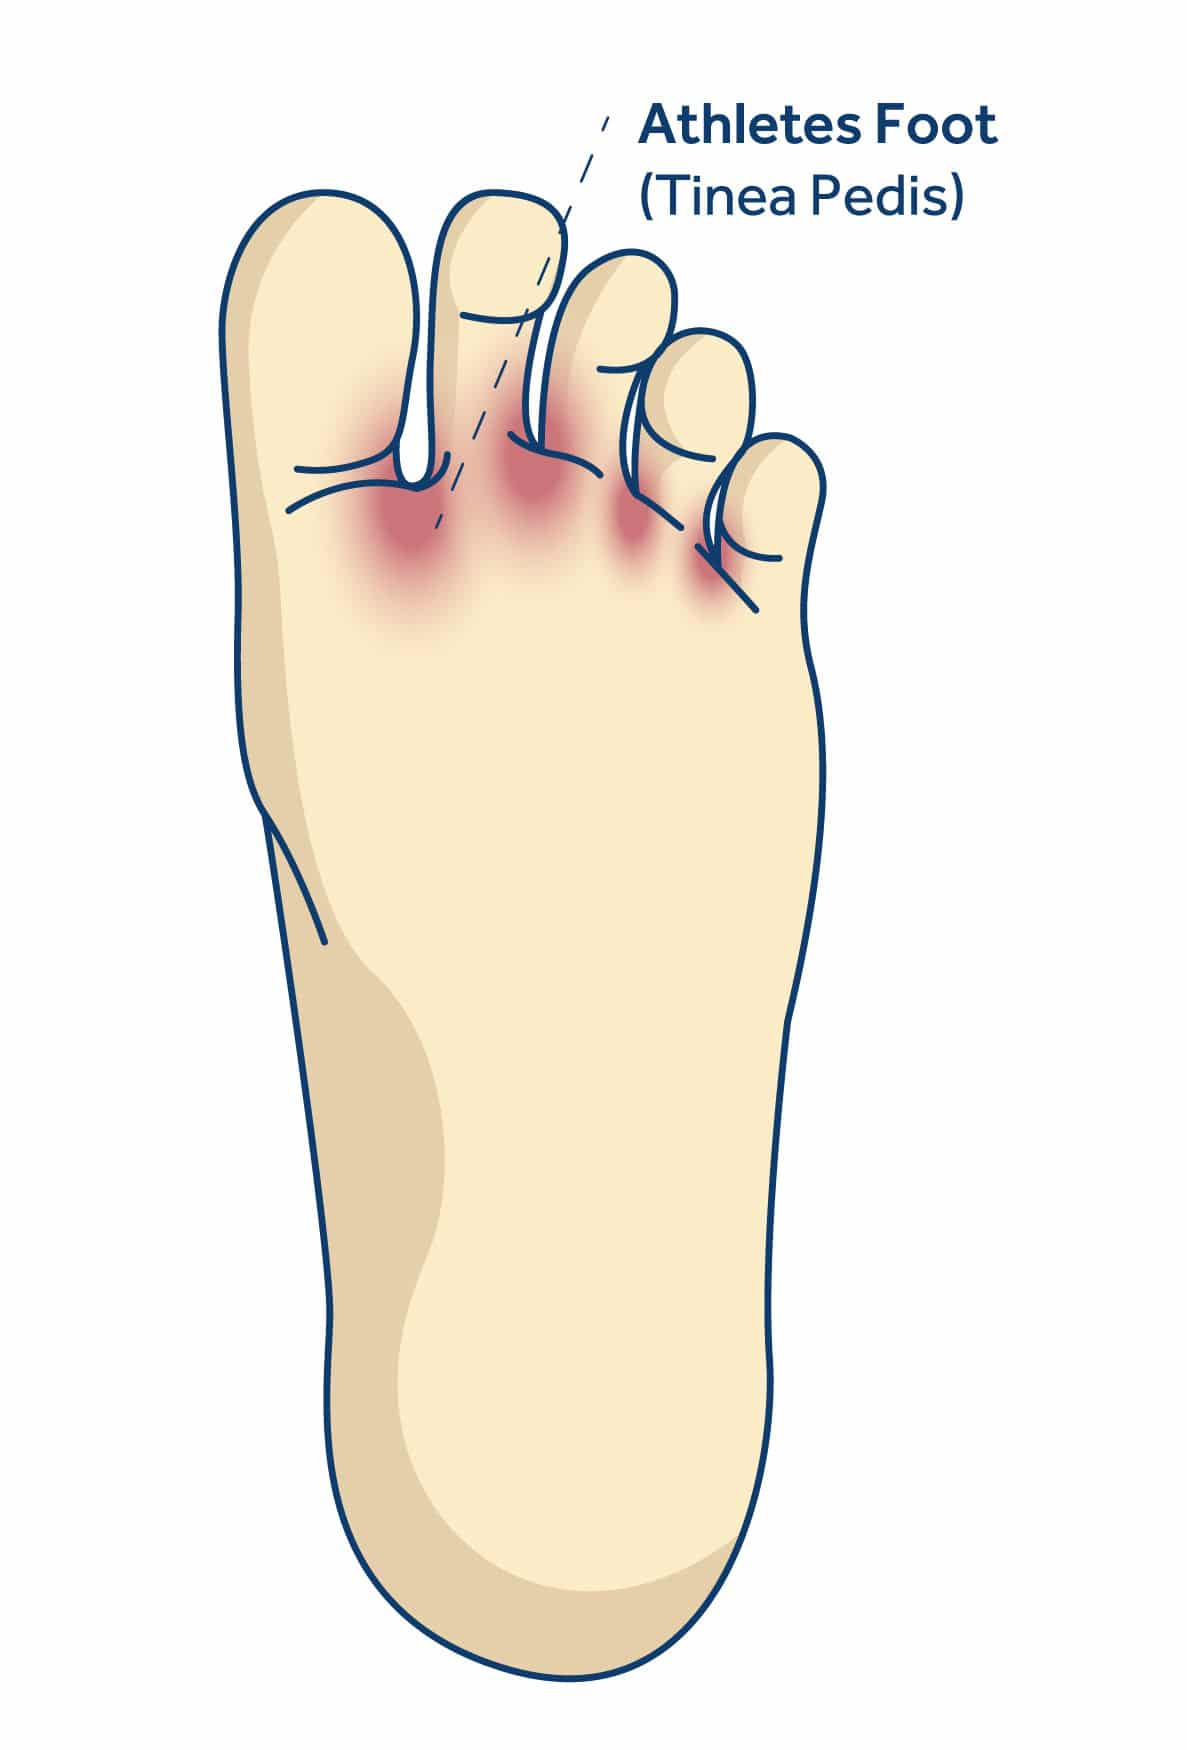 called athlete's foot, athlete's foot contagious, symptoms athlete's foot